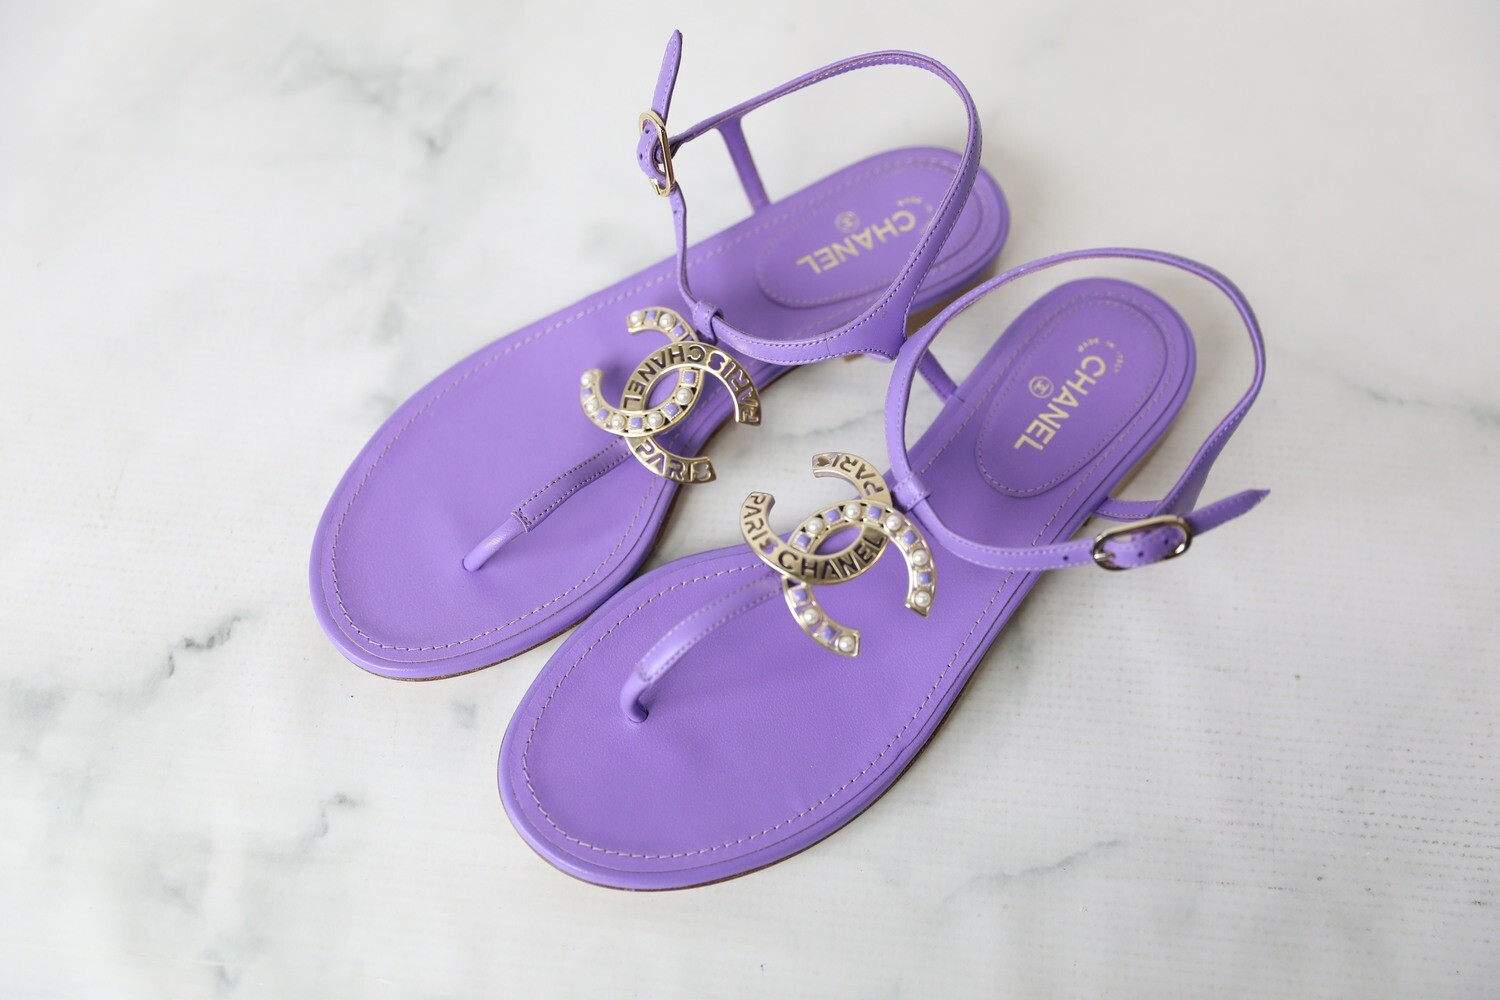 Chanel Shoes Thong Sandals, Purple, Size 37.5, New in Box WA001